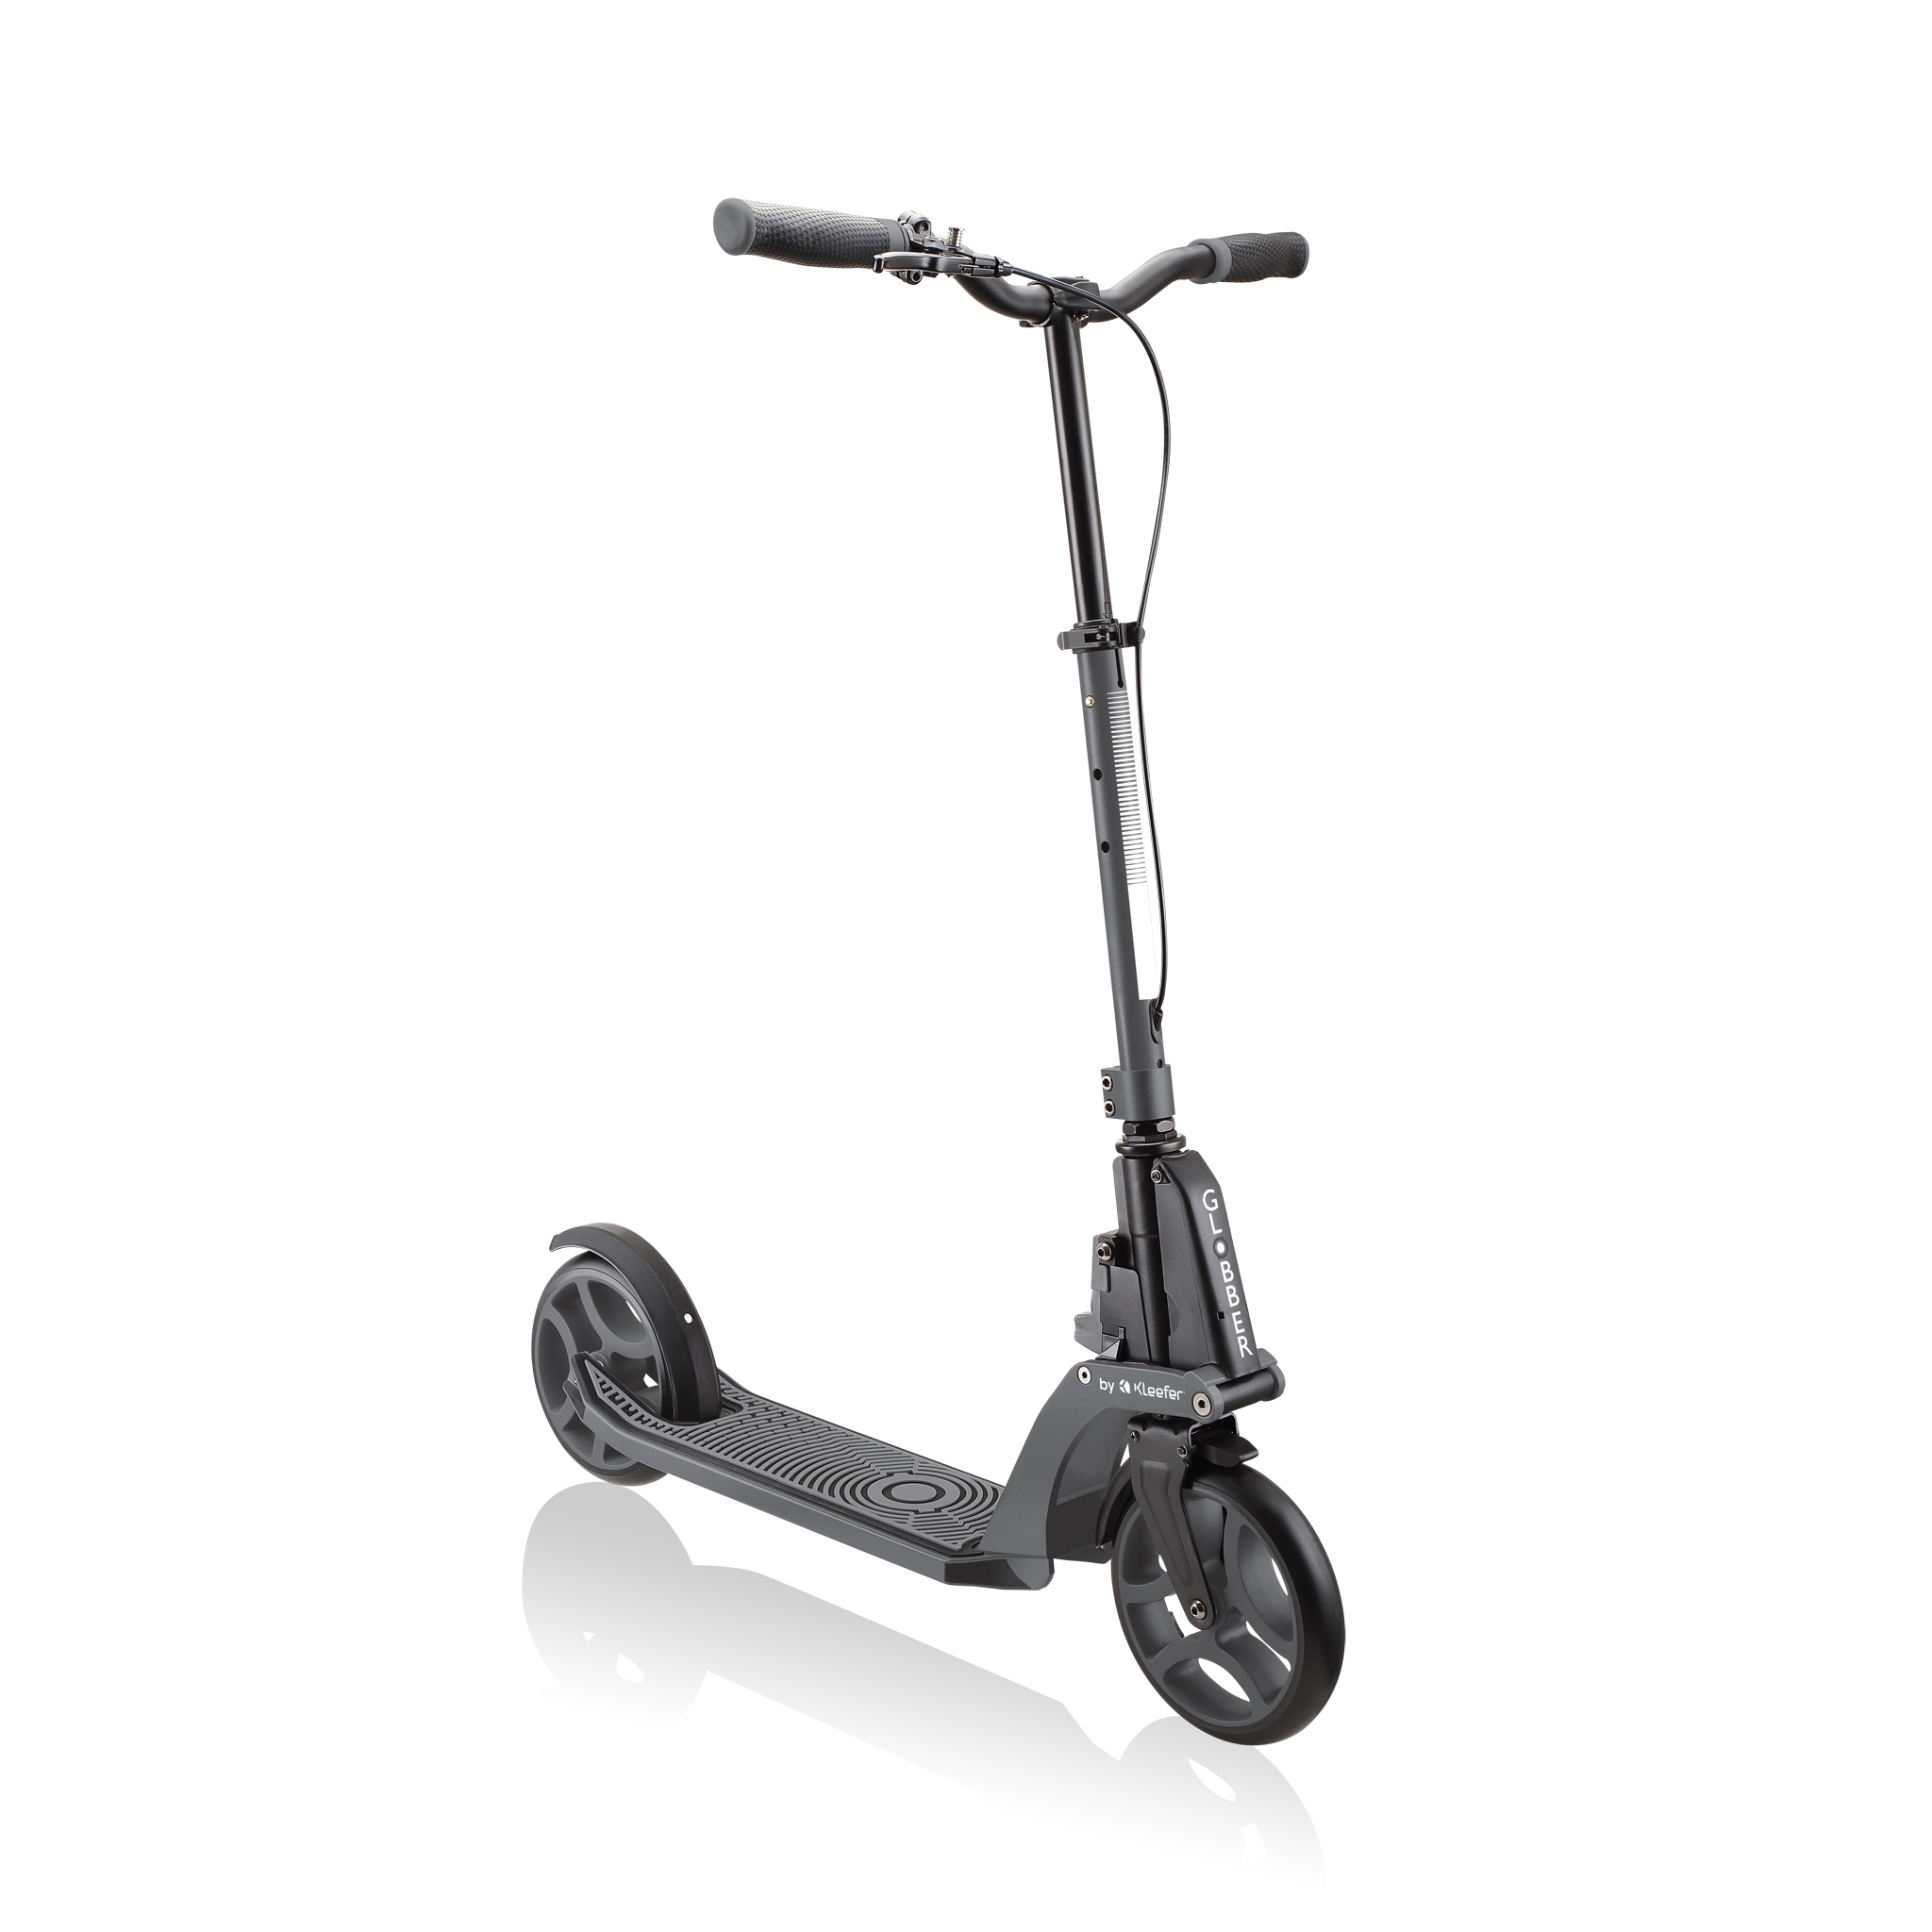 ONE-K-200-PISTON-DELUXE-best-folding-scooter-for-adults 0